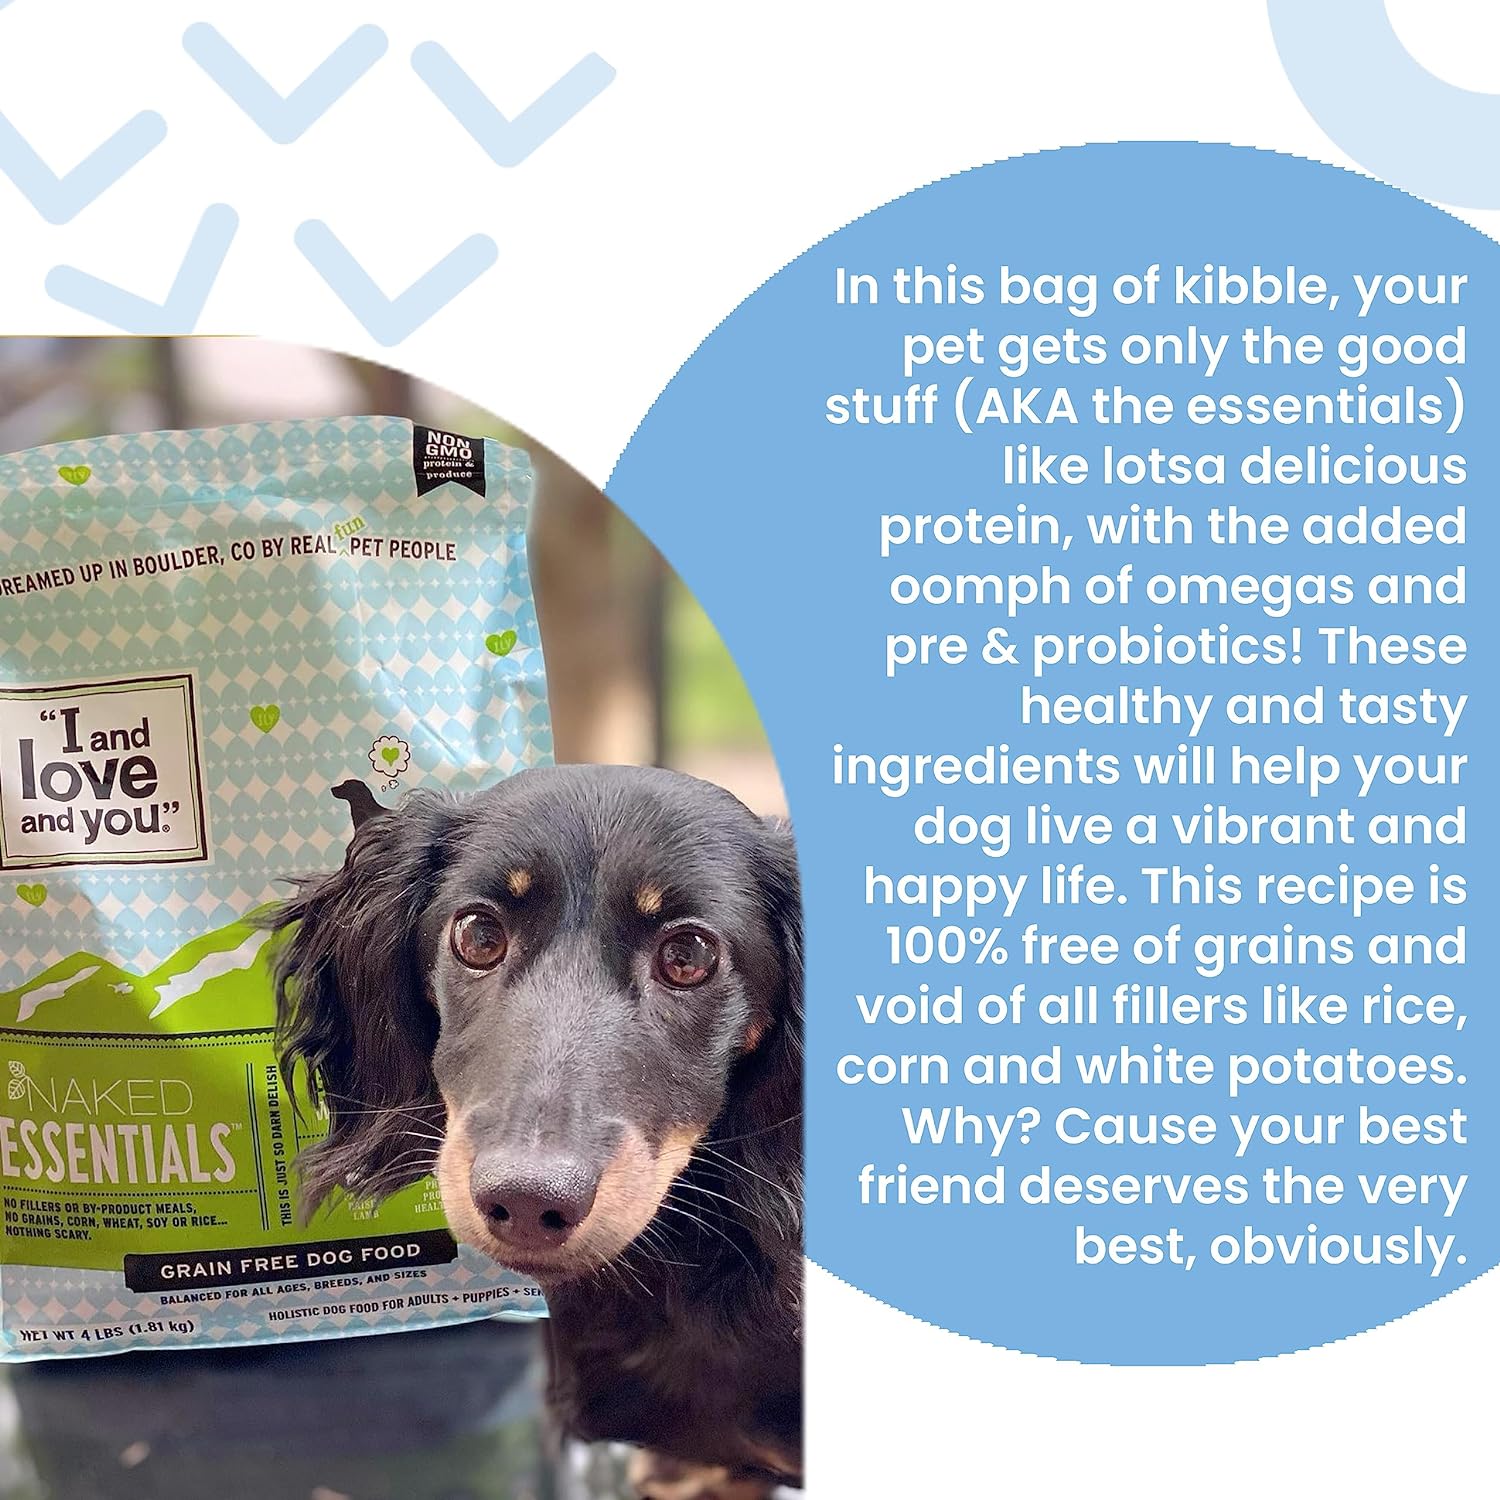 I and love and you Naked Essentials Dry Dog Food - Lamb + Bison - High Protein, Real Meat, No Fillers, Prebiotics + Probiotics, 23lb Bag : Pet Supplies